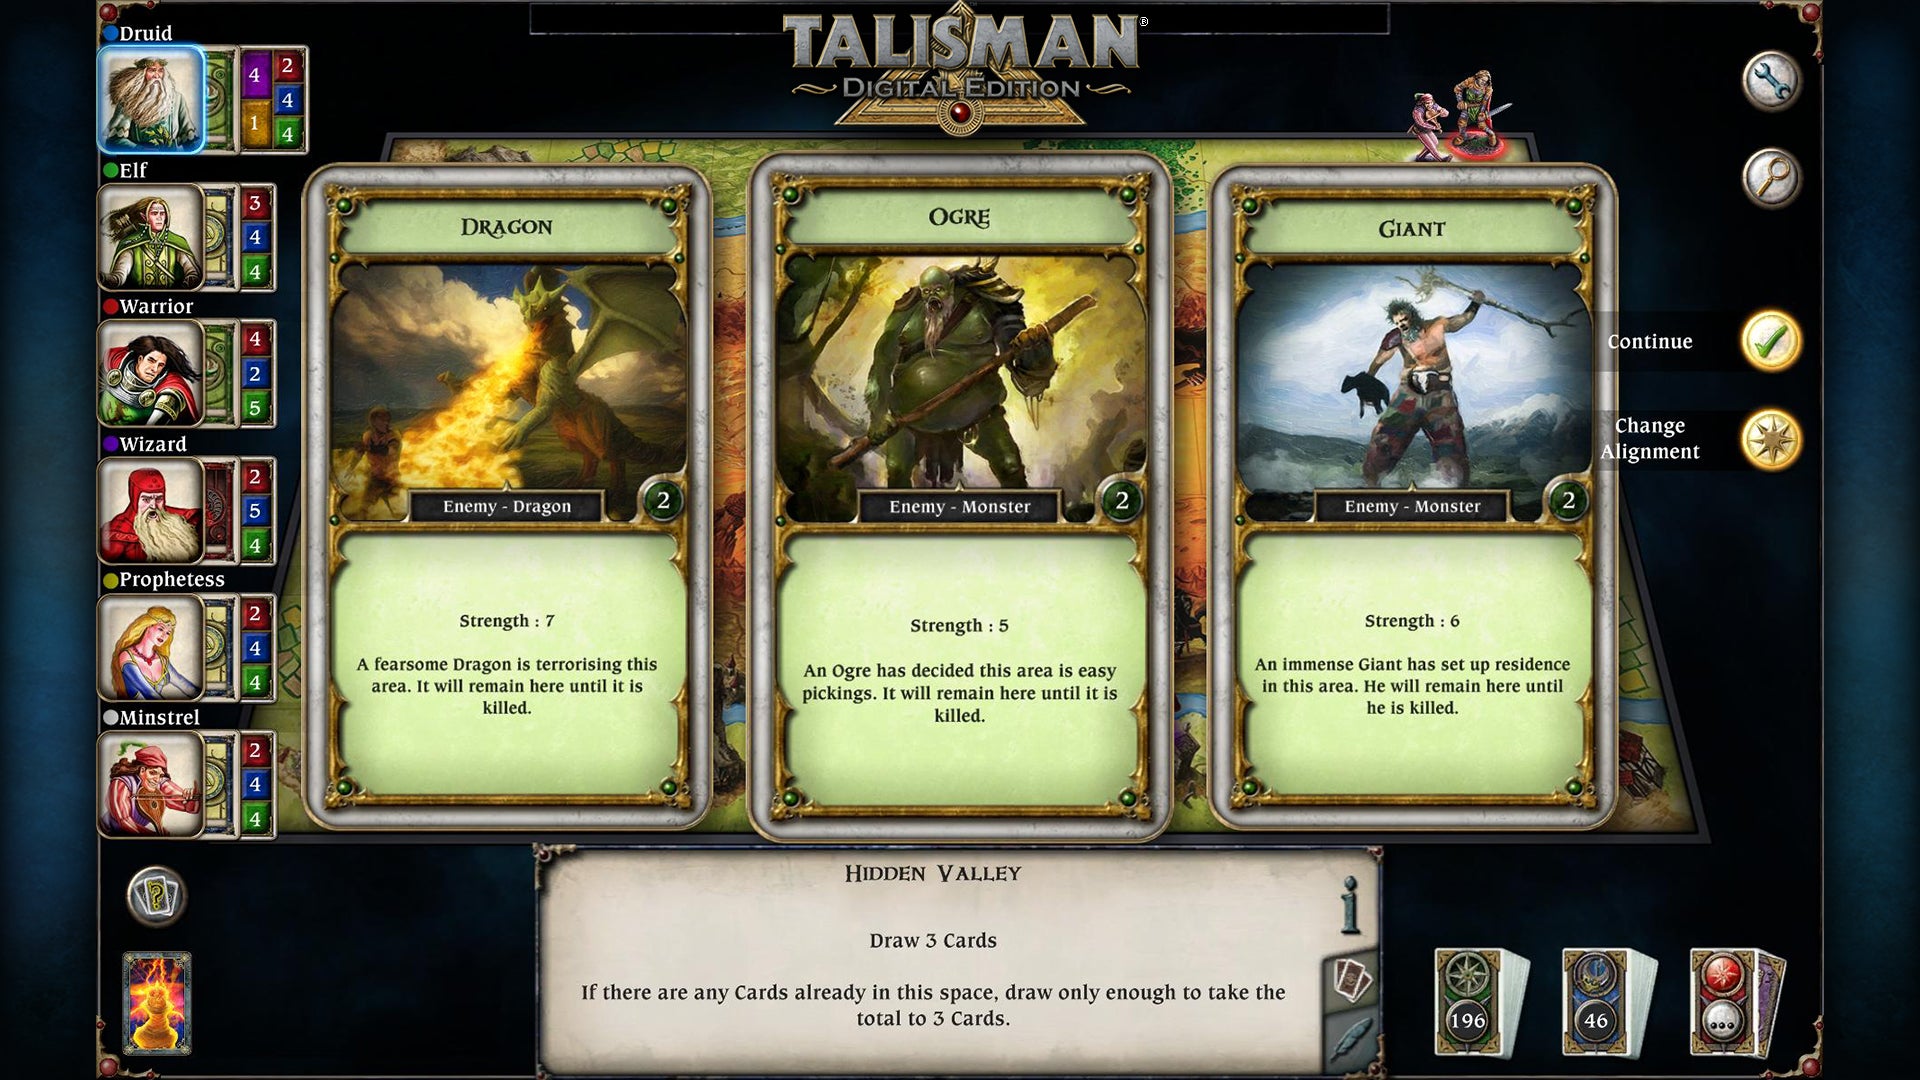 An image of the video game Talisman: Digital Edition